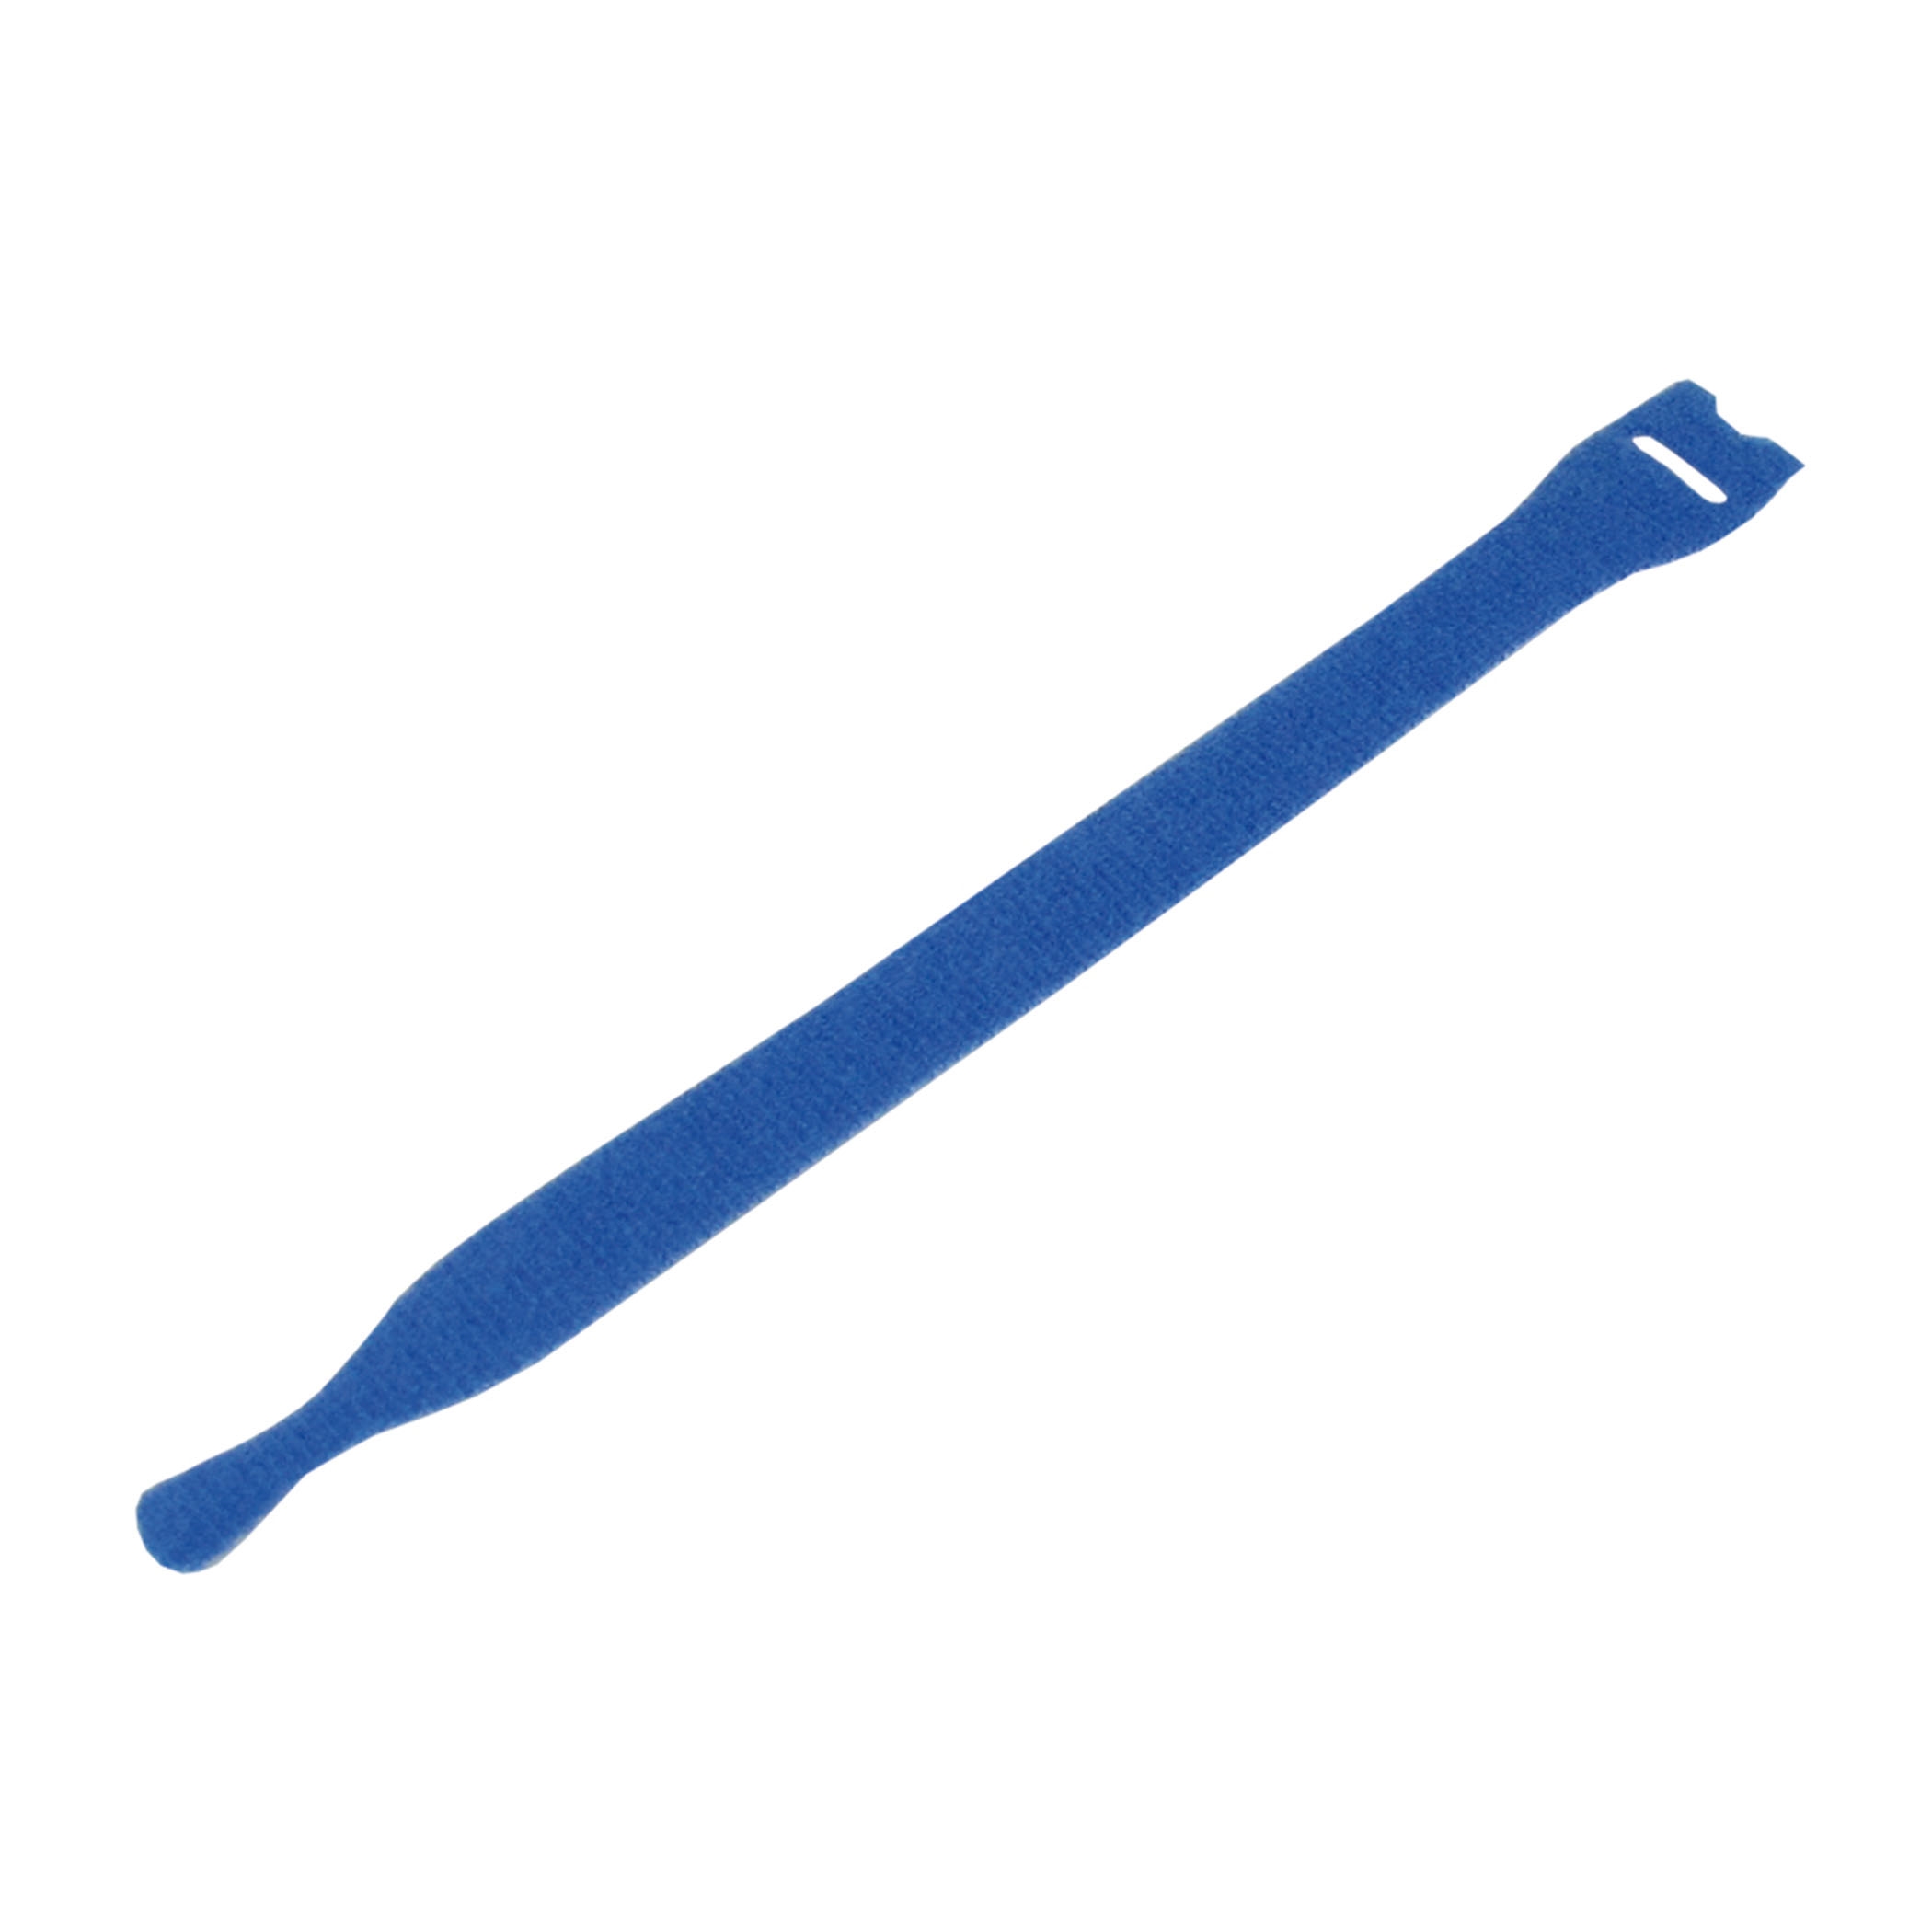 Cable Tie Blue - t1513-200bh